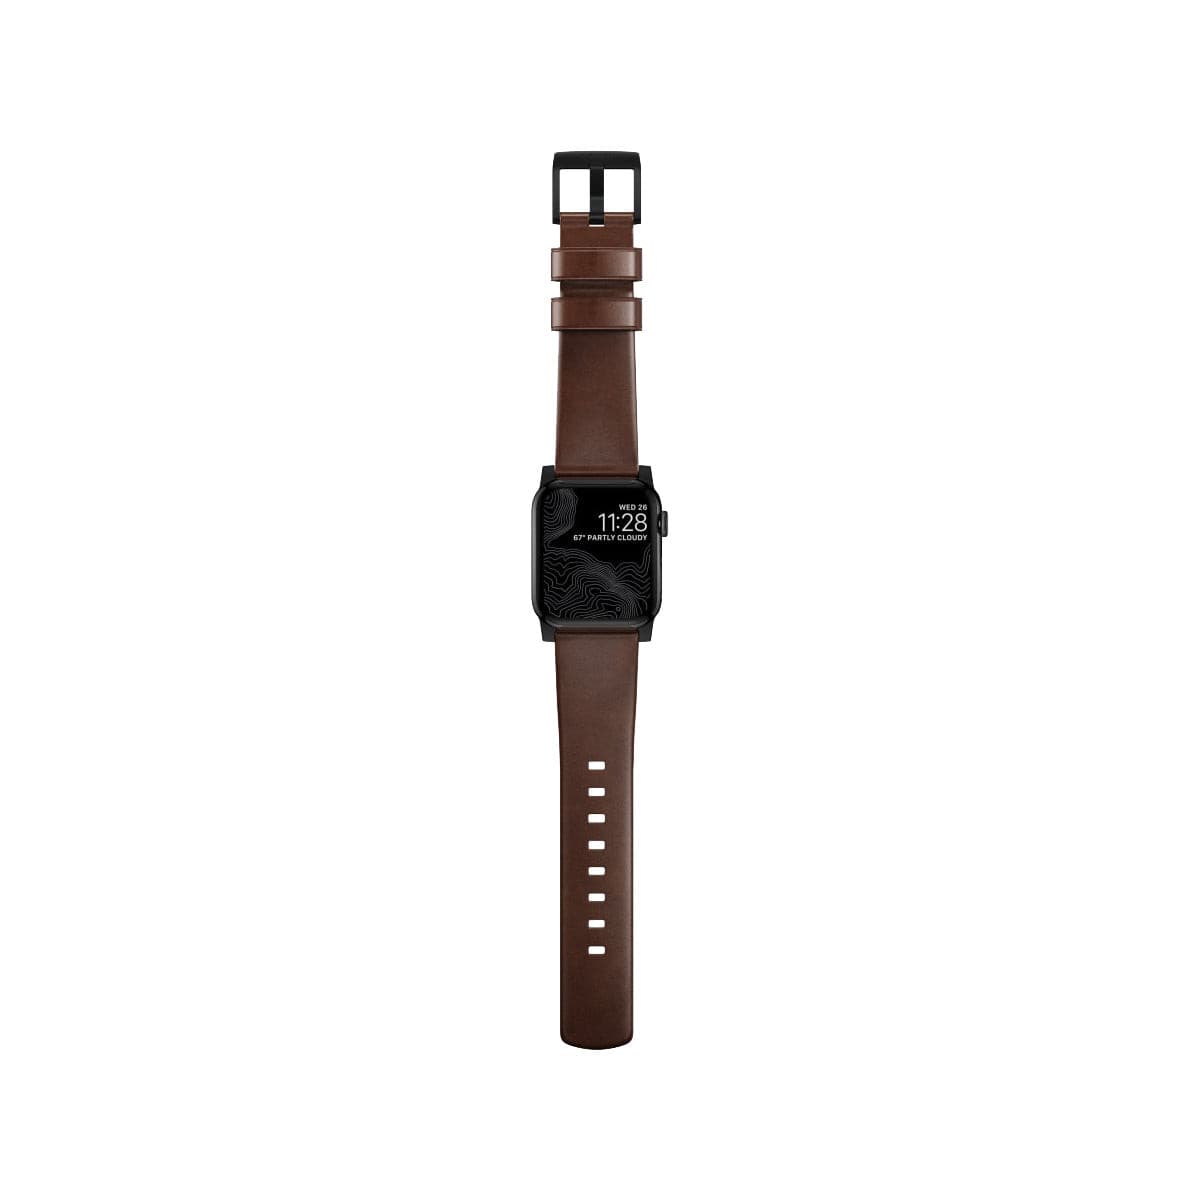 Nomad Modern Band for Apple Watch 41mm - Black Hardware with Rustic Brown Horween Leather.